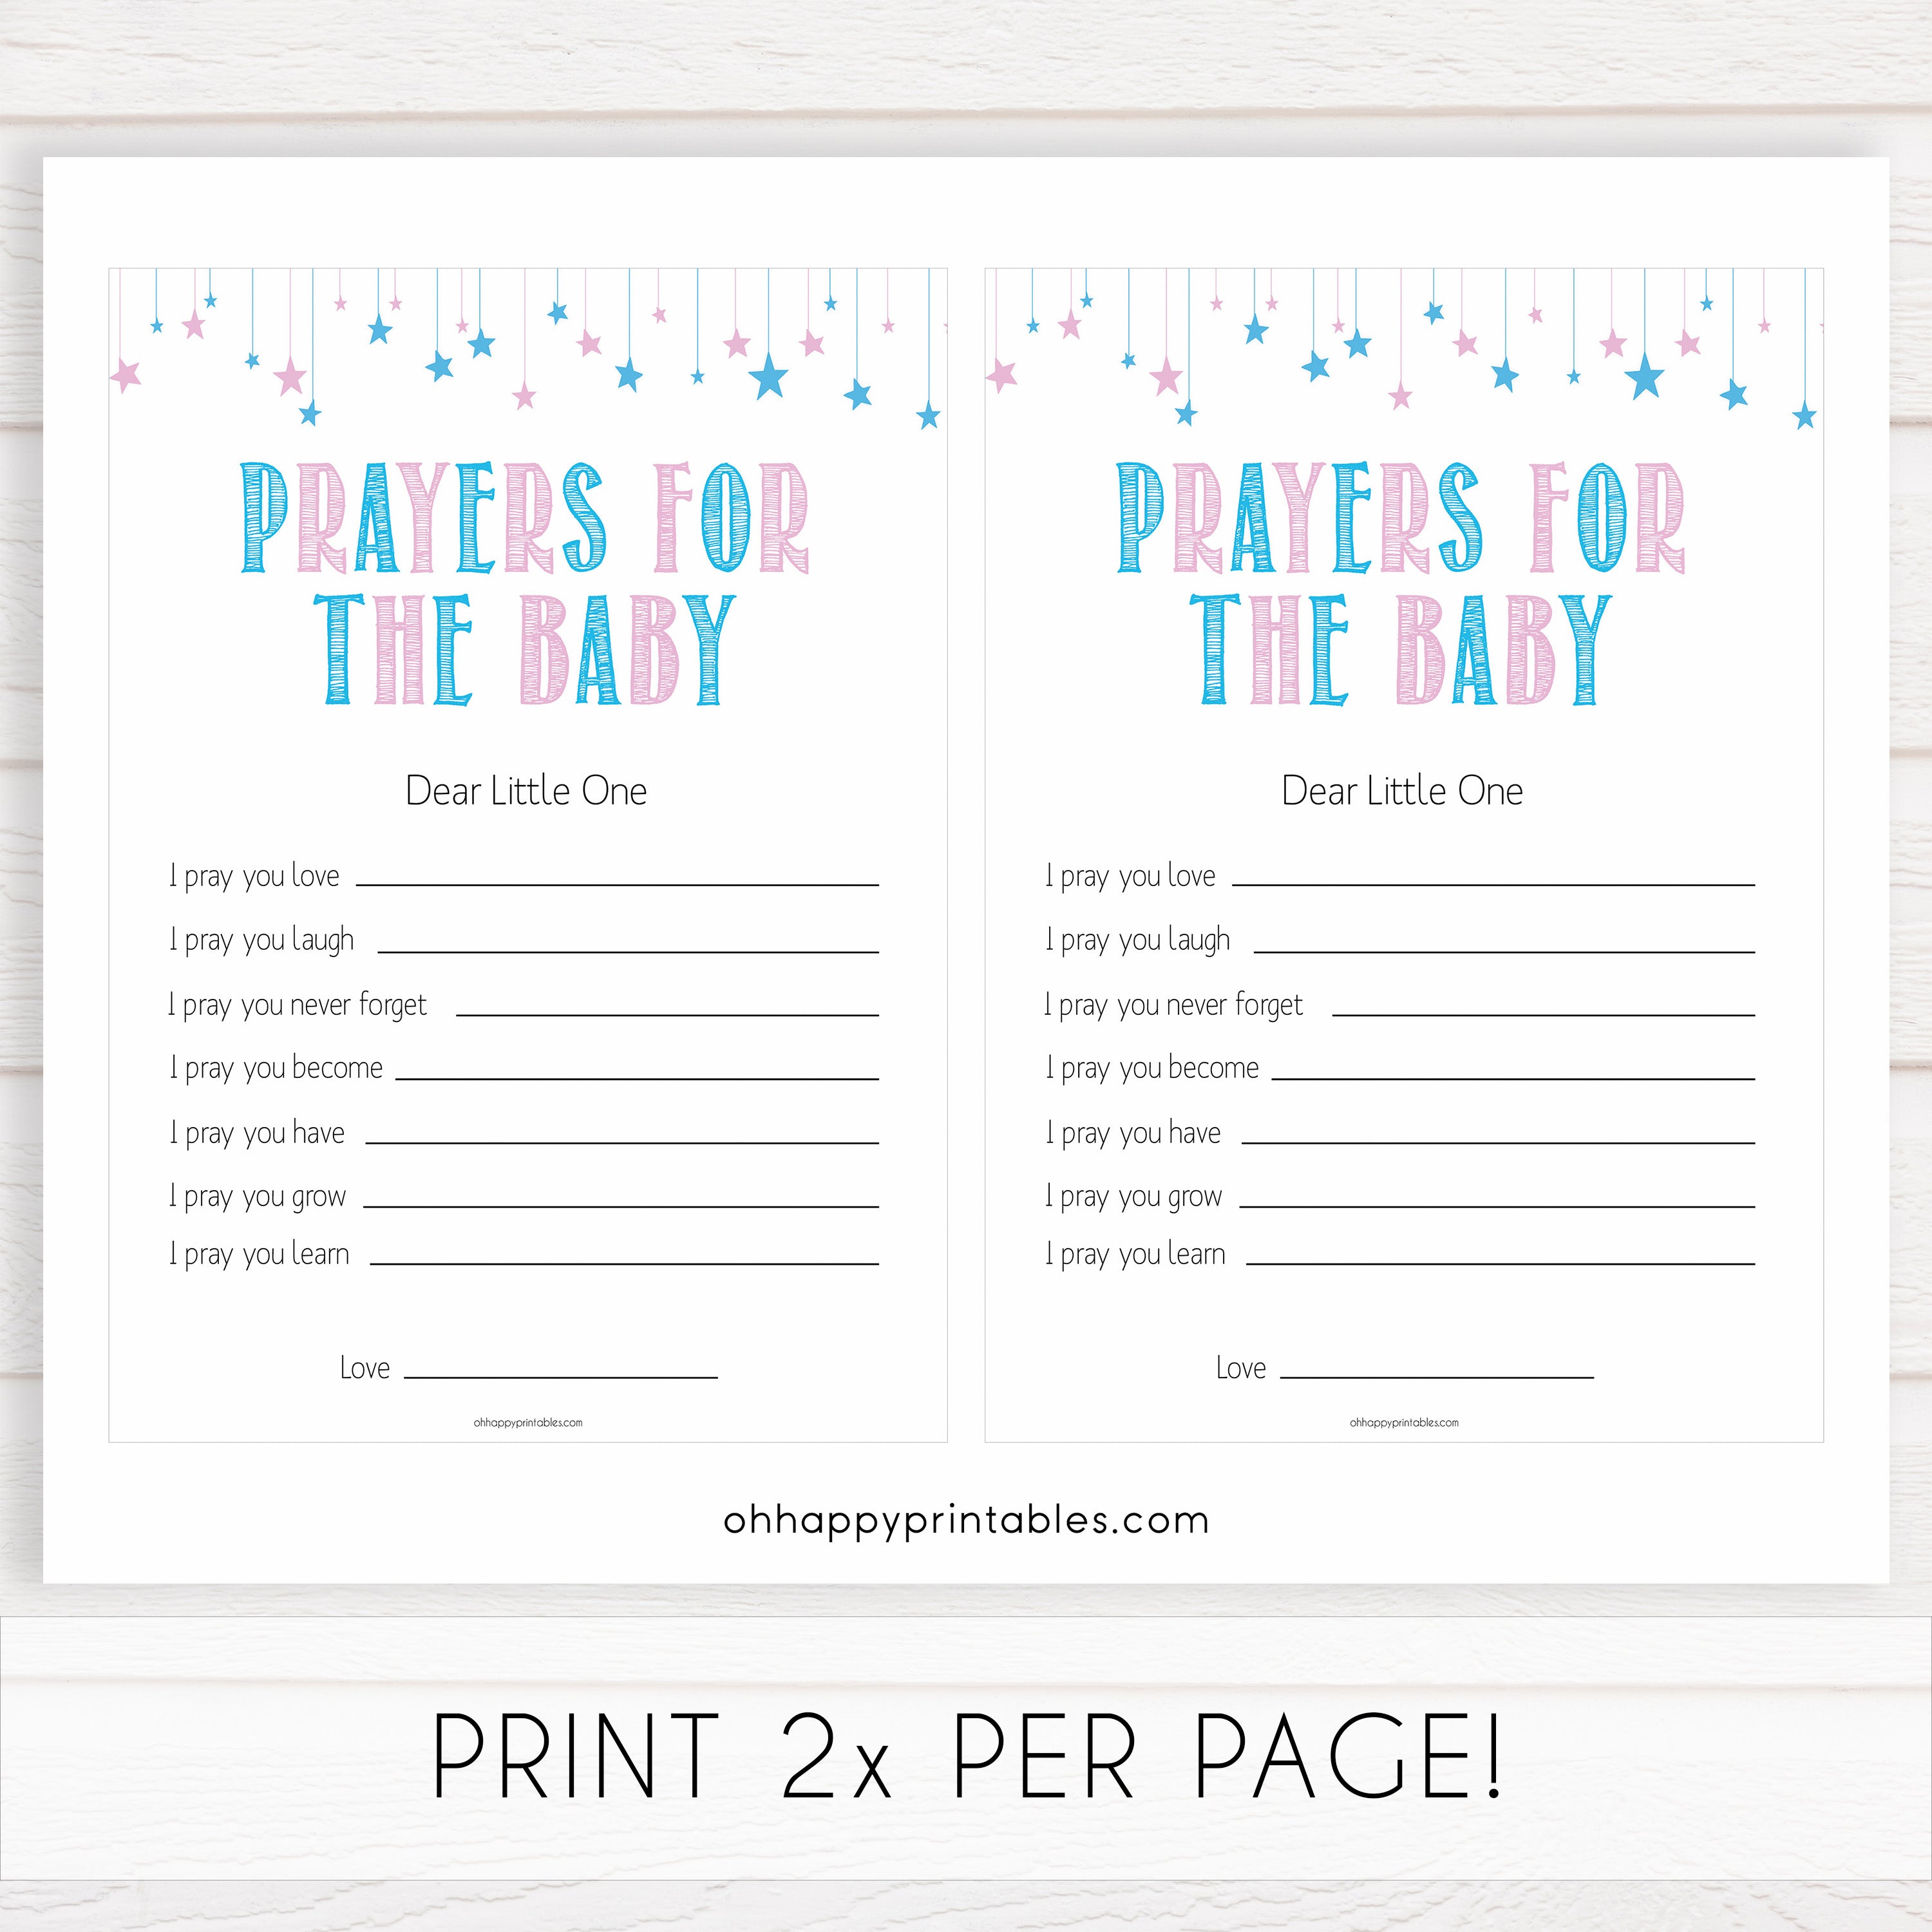 Gender reveal baby games, prayers for the baby baby game, gender reveal shower, fun baby games, gender reveal ideas, popular baby games, best baby games, printable baby games, gender reveal baby games